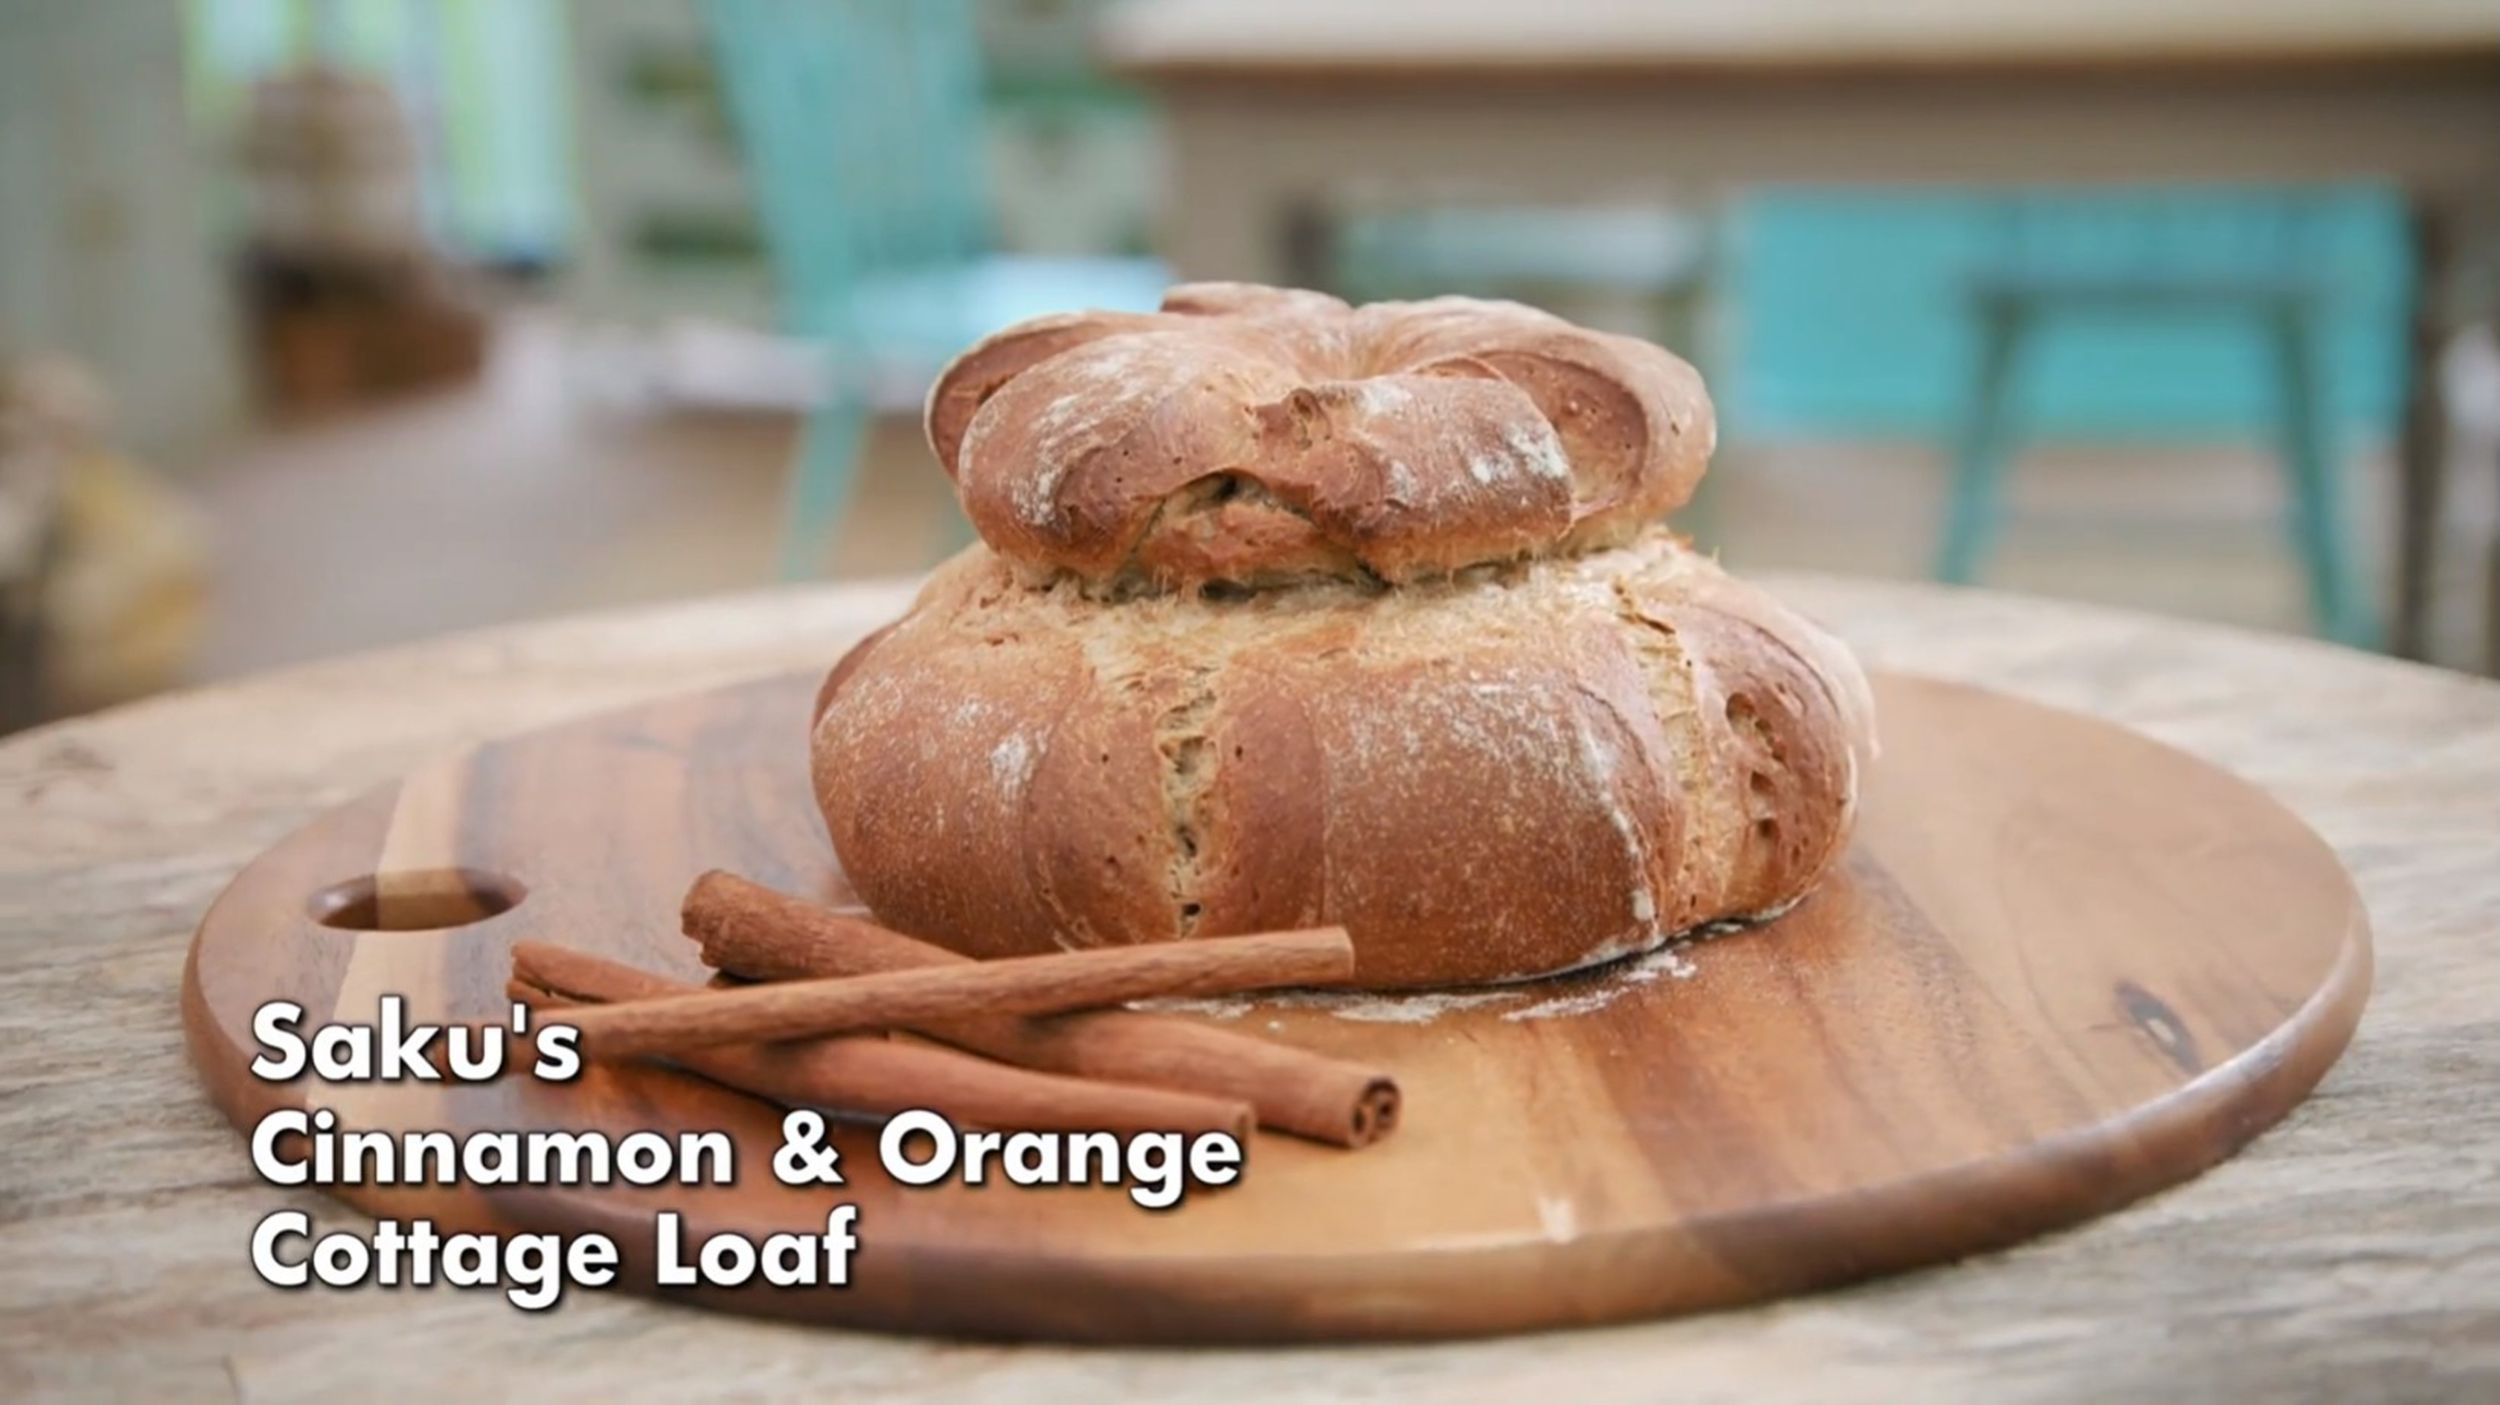 Saku's Cinnamon & Orange Cottage Loaf from the Signature Challenge in 'The Great British Baking Show's Season 14 Bread Week